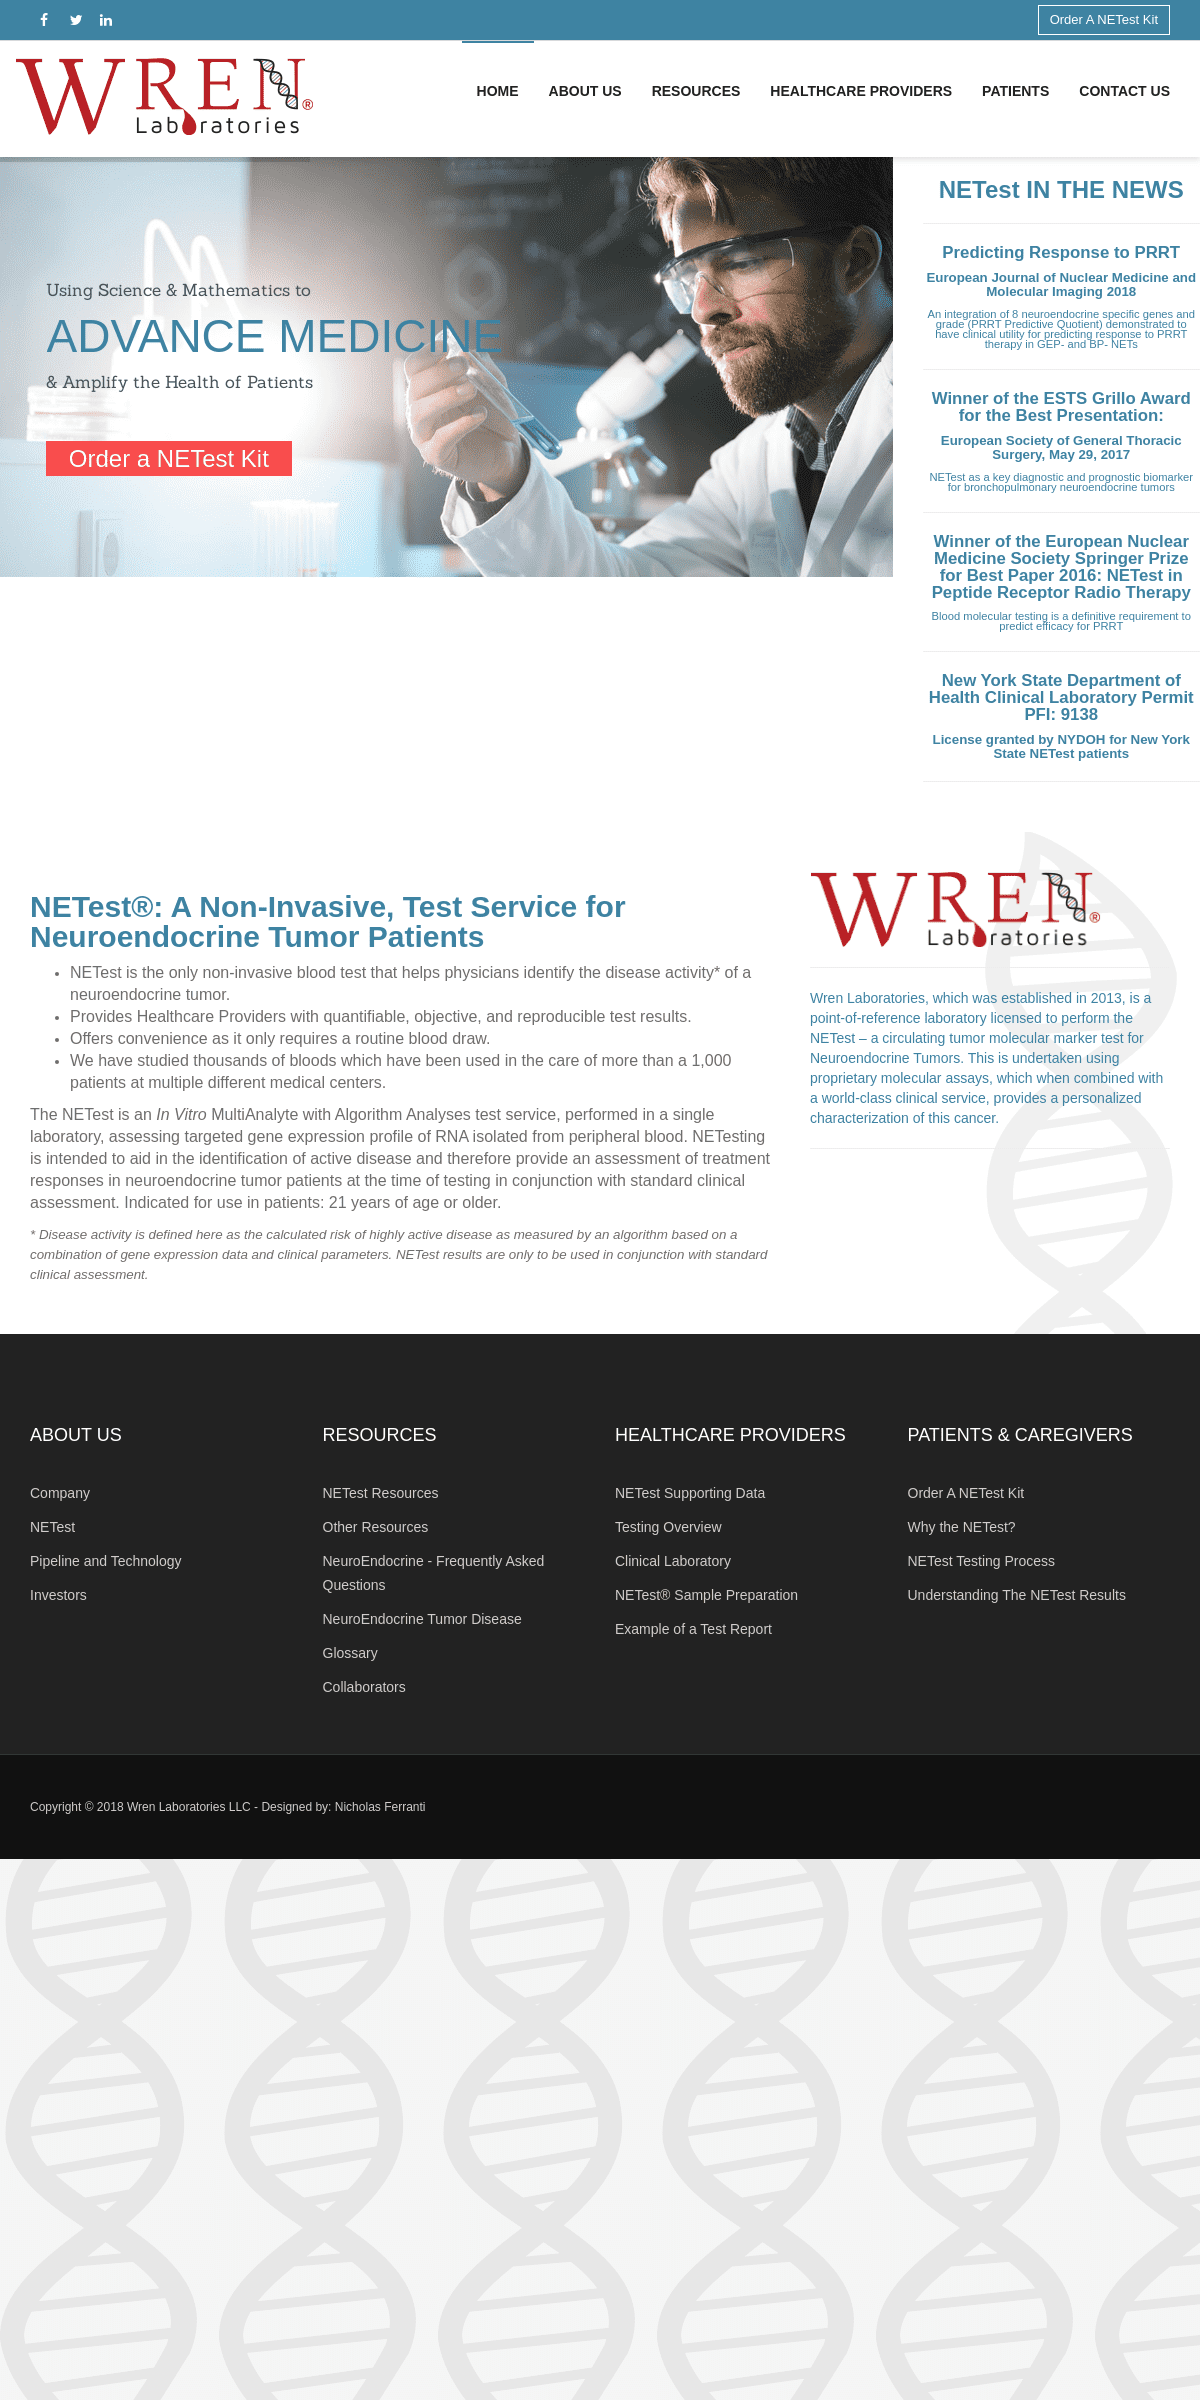 A complete backup of wrenlaboratories.com